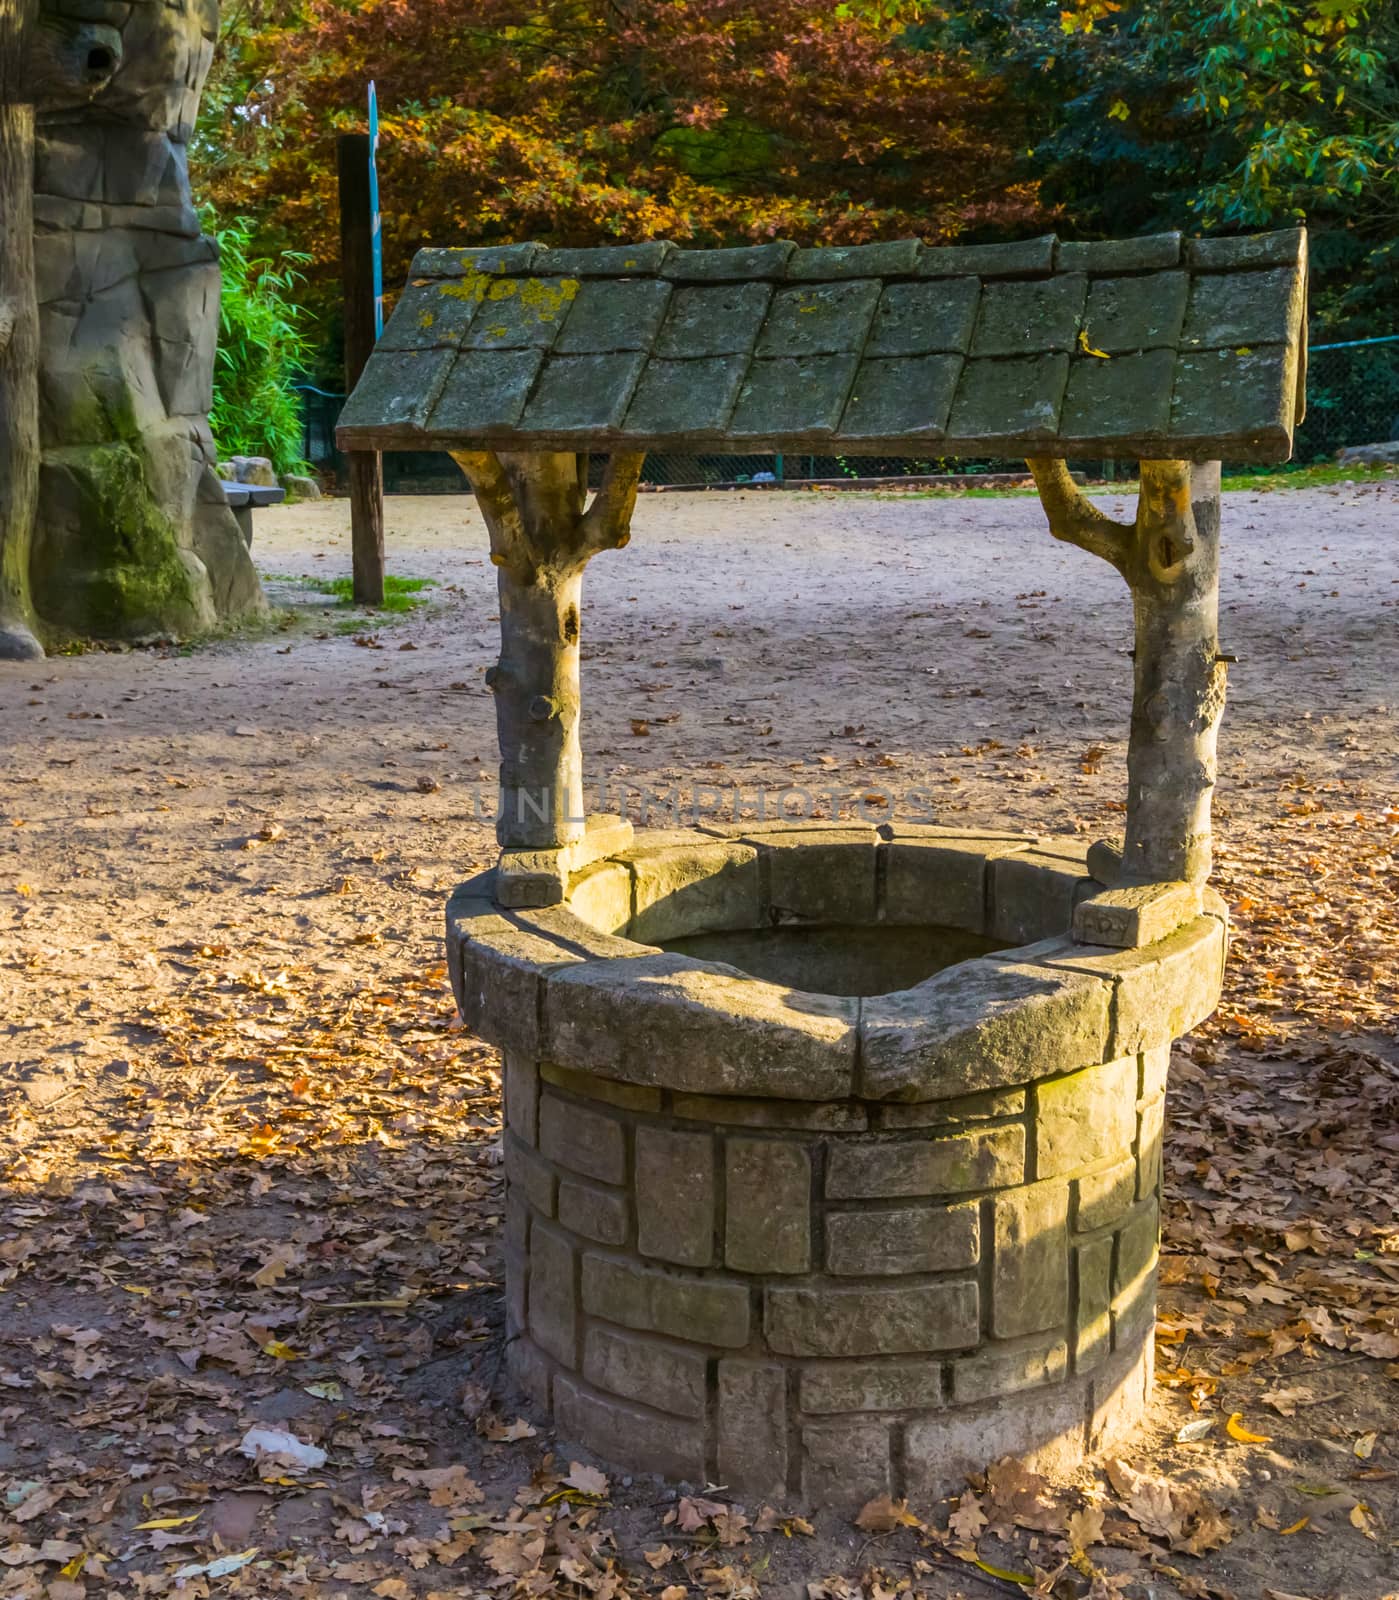 classical water well, medieval looking architecture, historical decorations